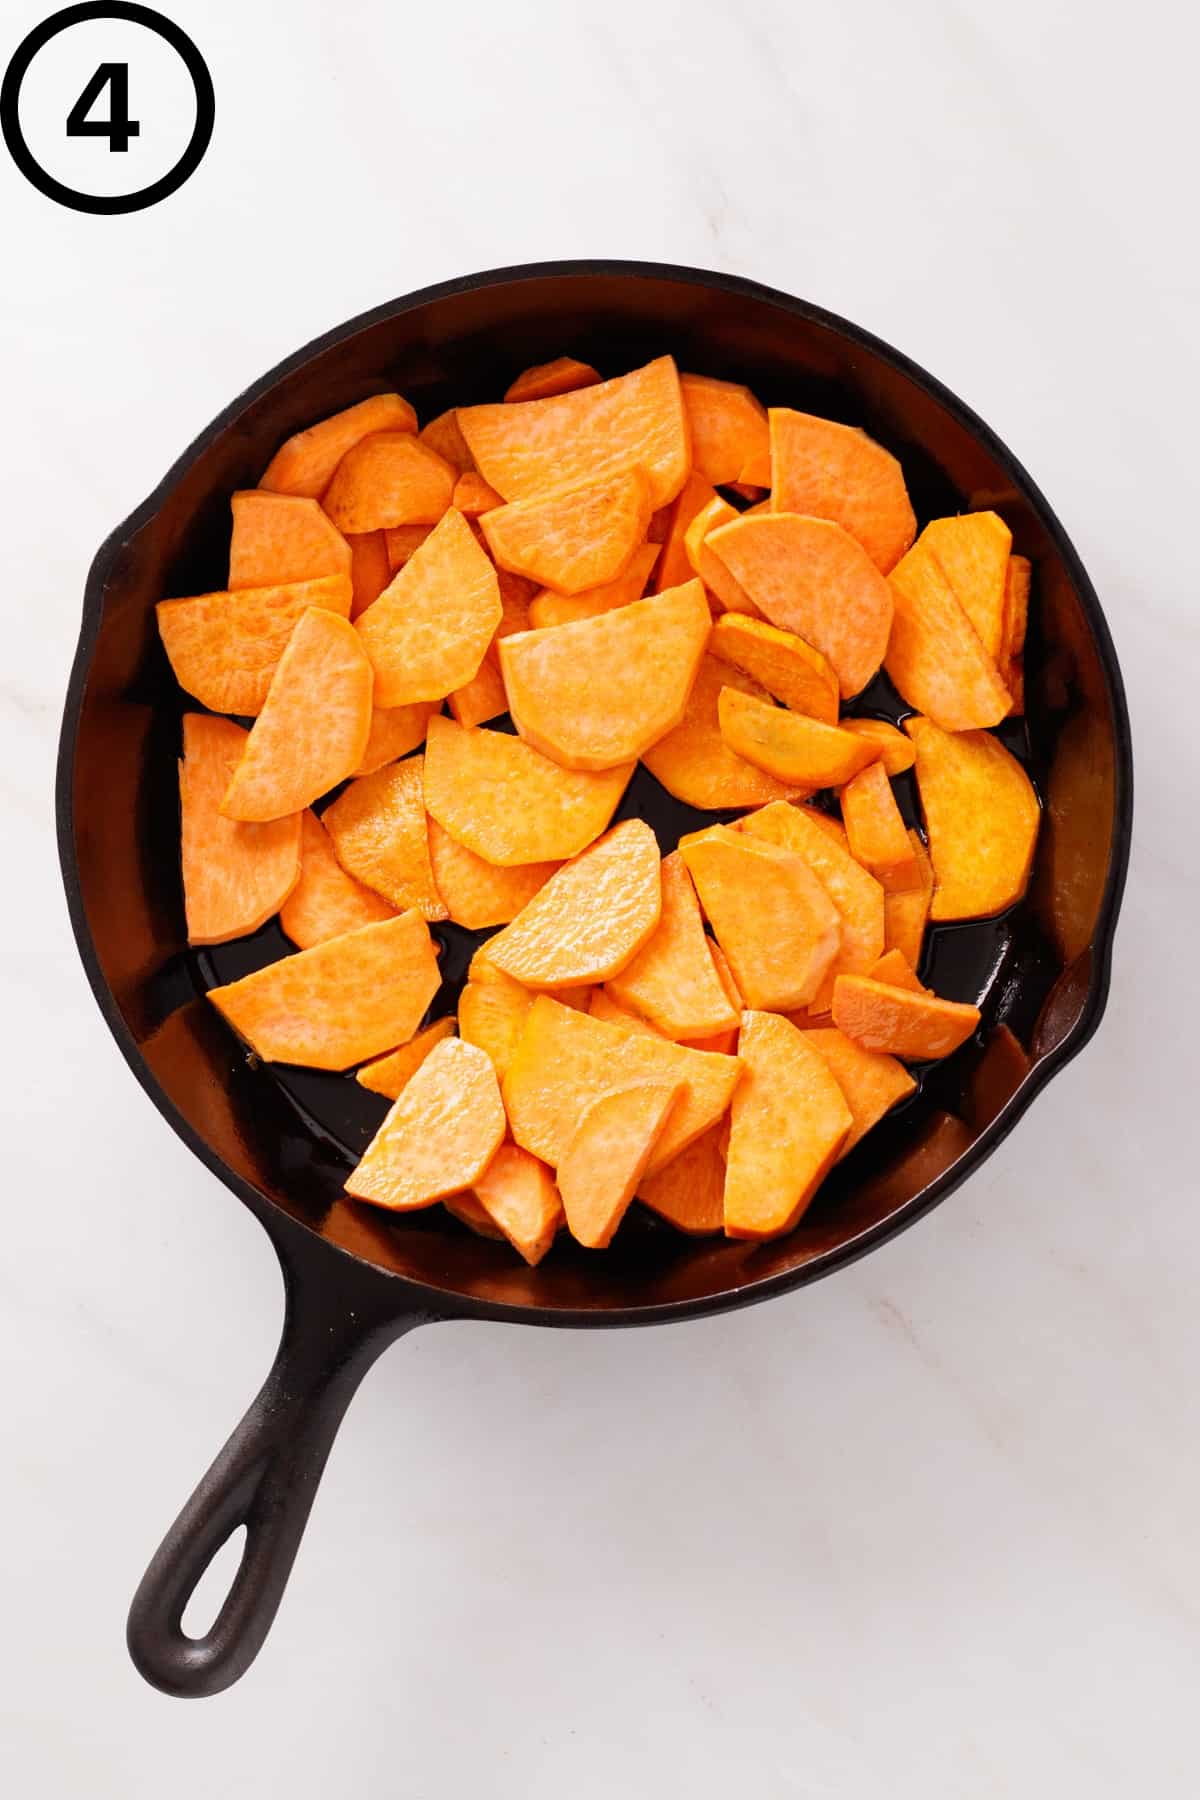 Sweet potatoes tossed in olive oil.